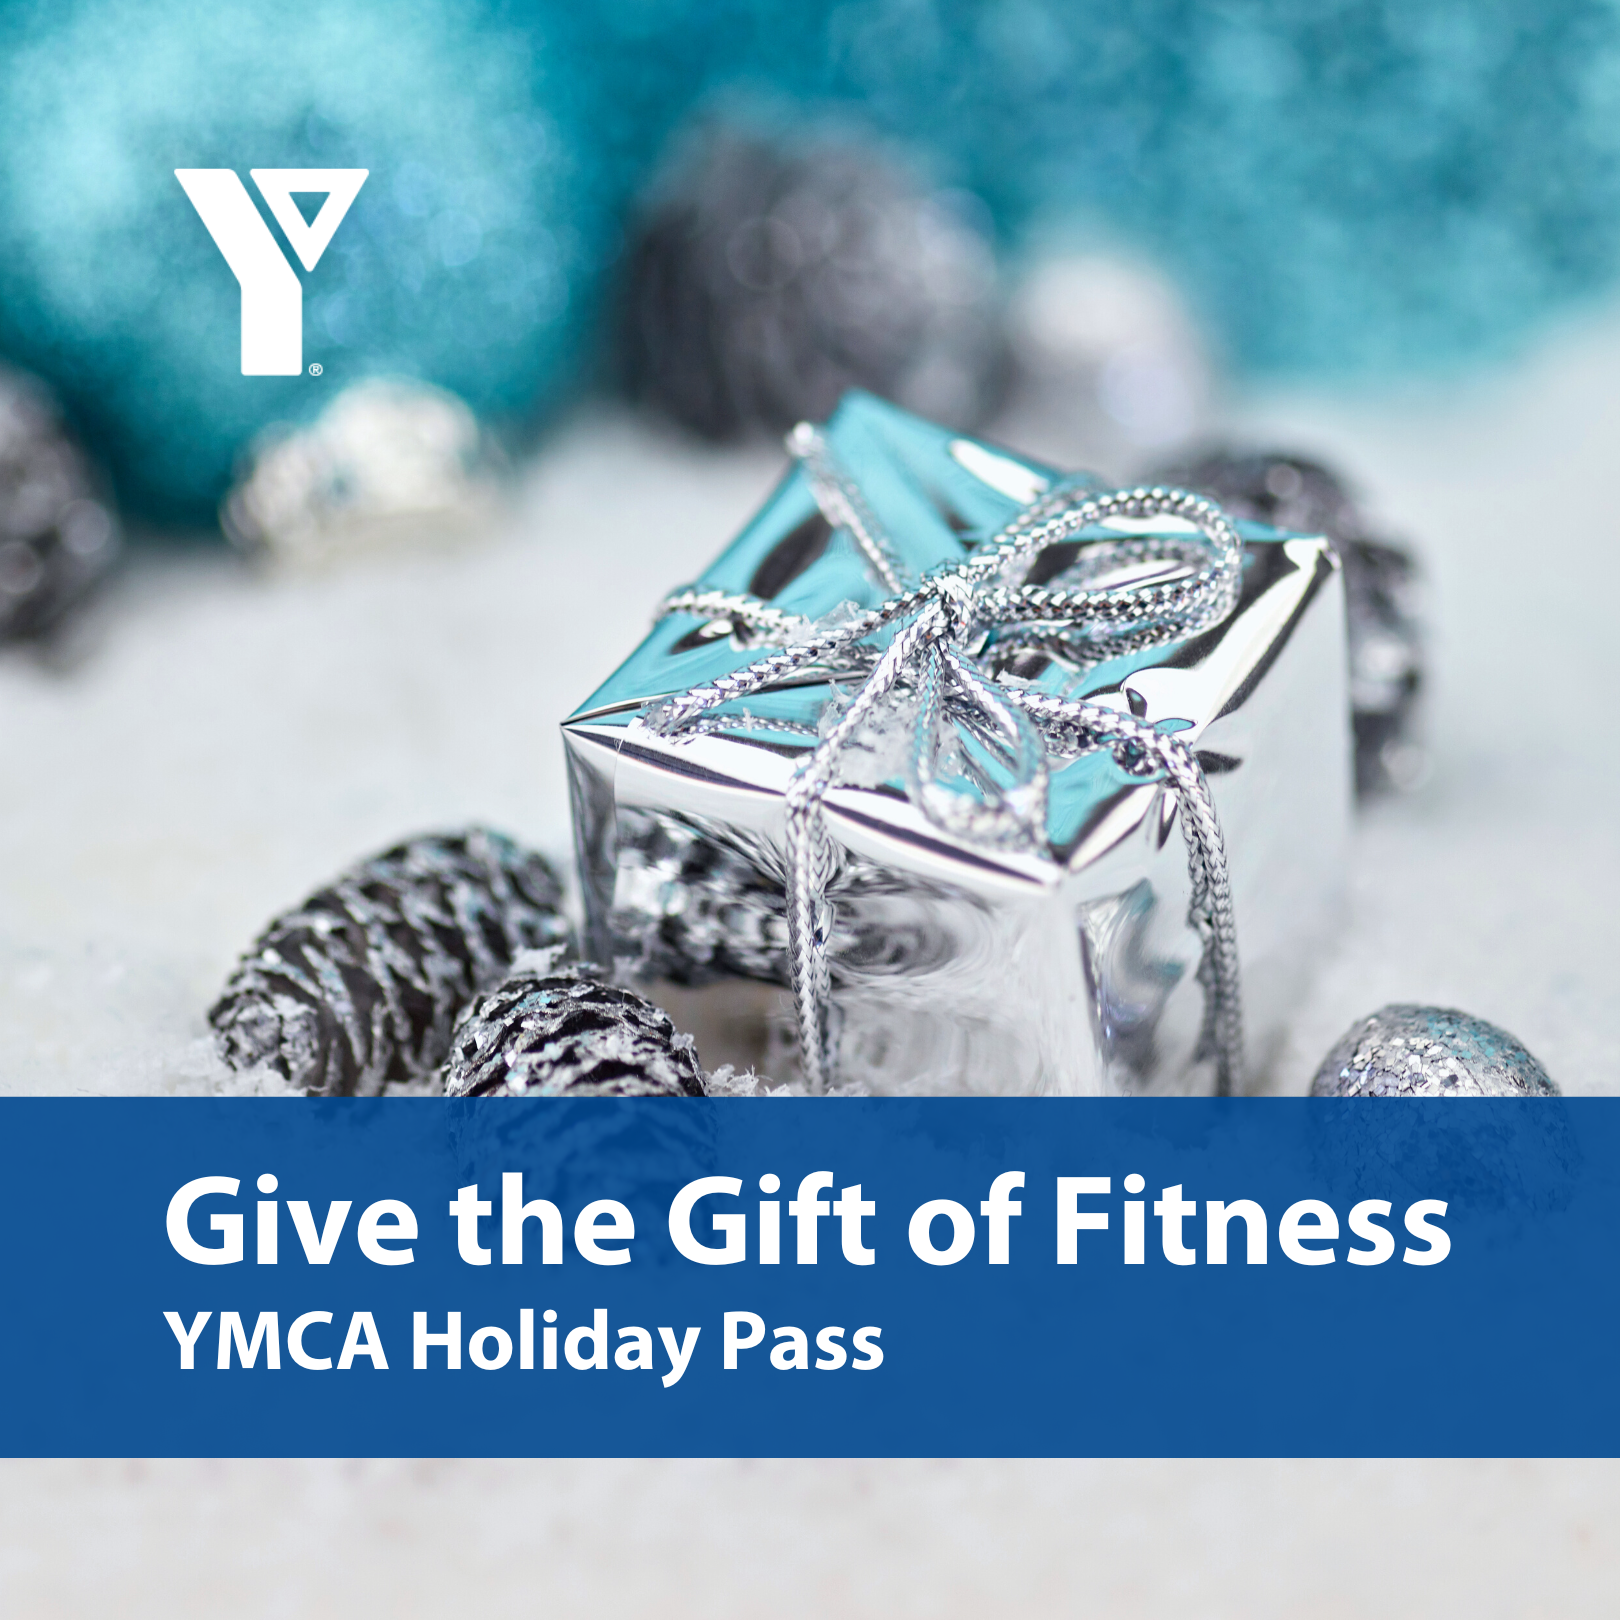 Give the gift of fitness